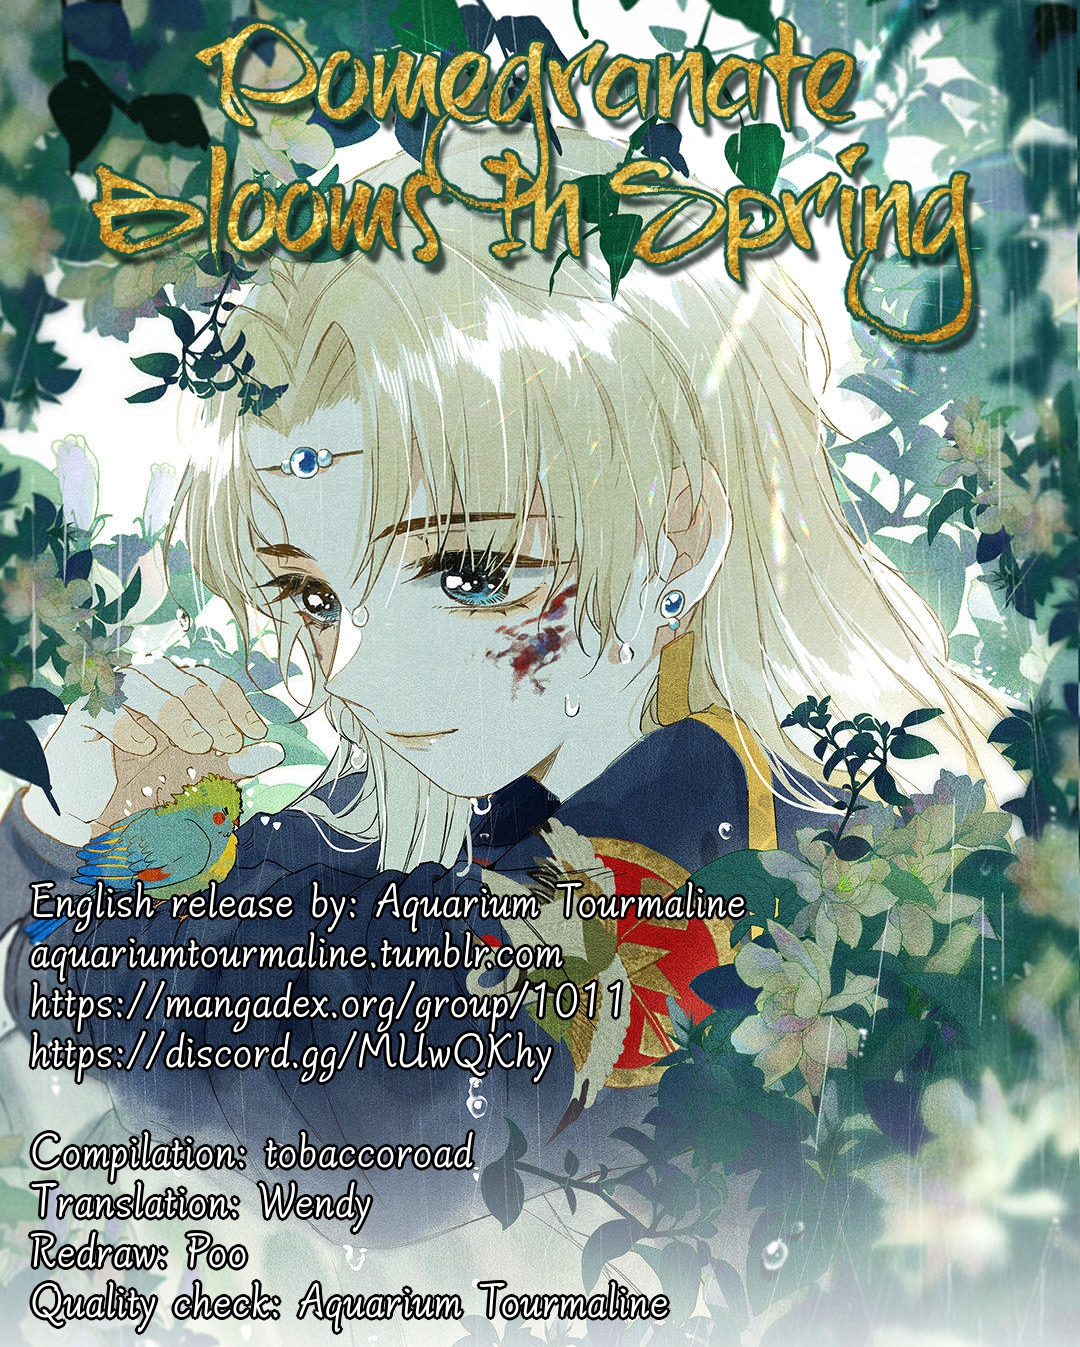 Pomegranate Blooms in Spring Ch. 1 Innocence of childhood friends